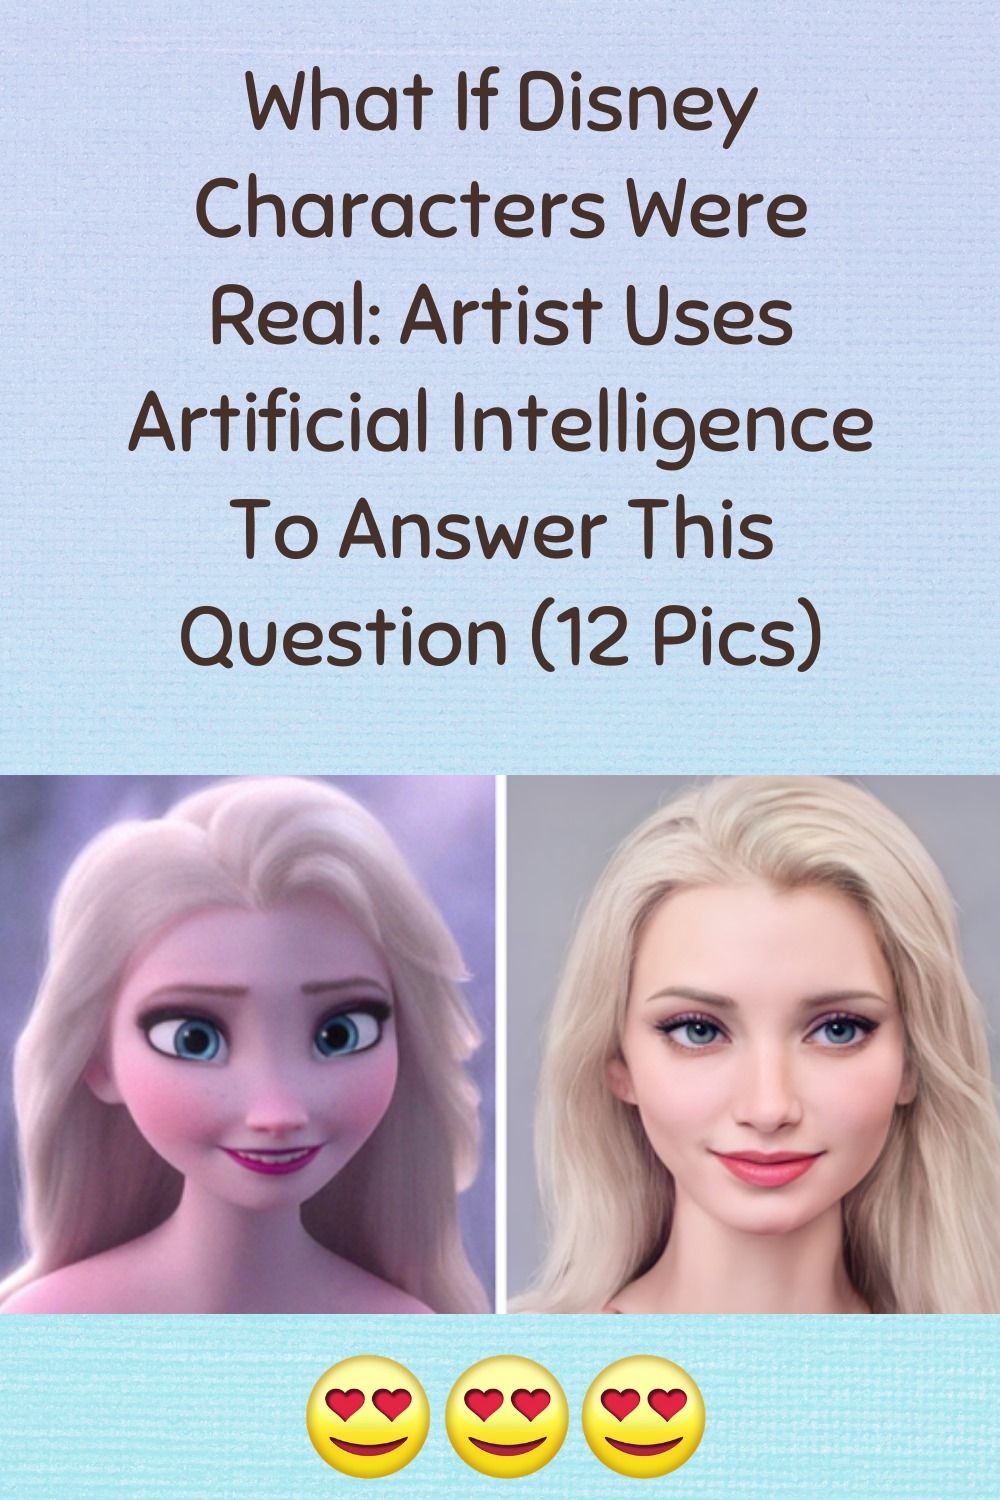 What If Disney Characters Were Real: Artist Uses Artificial Intelligence To Answer This Question